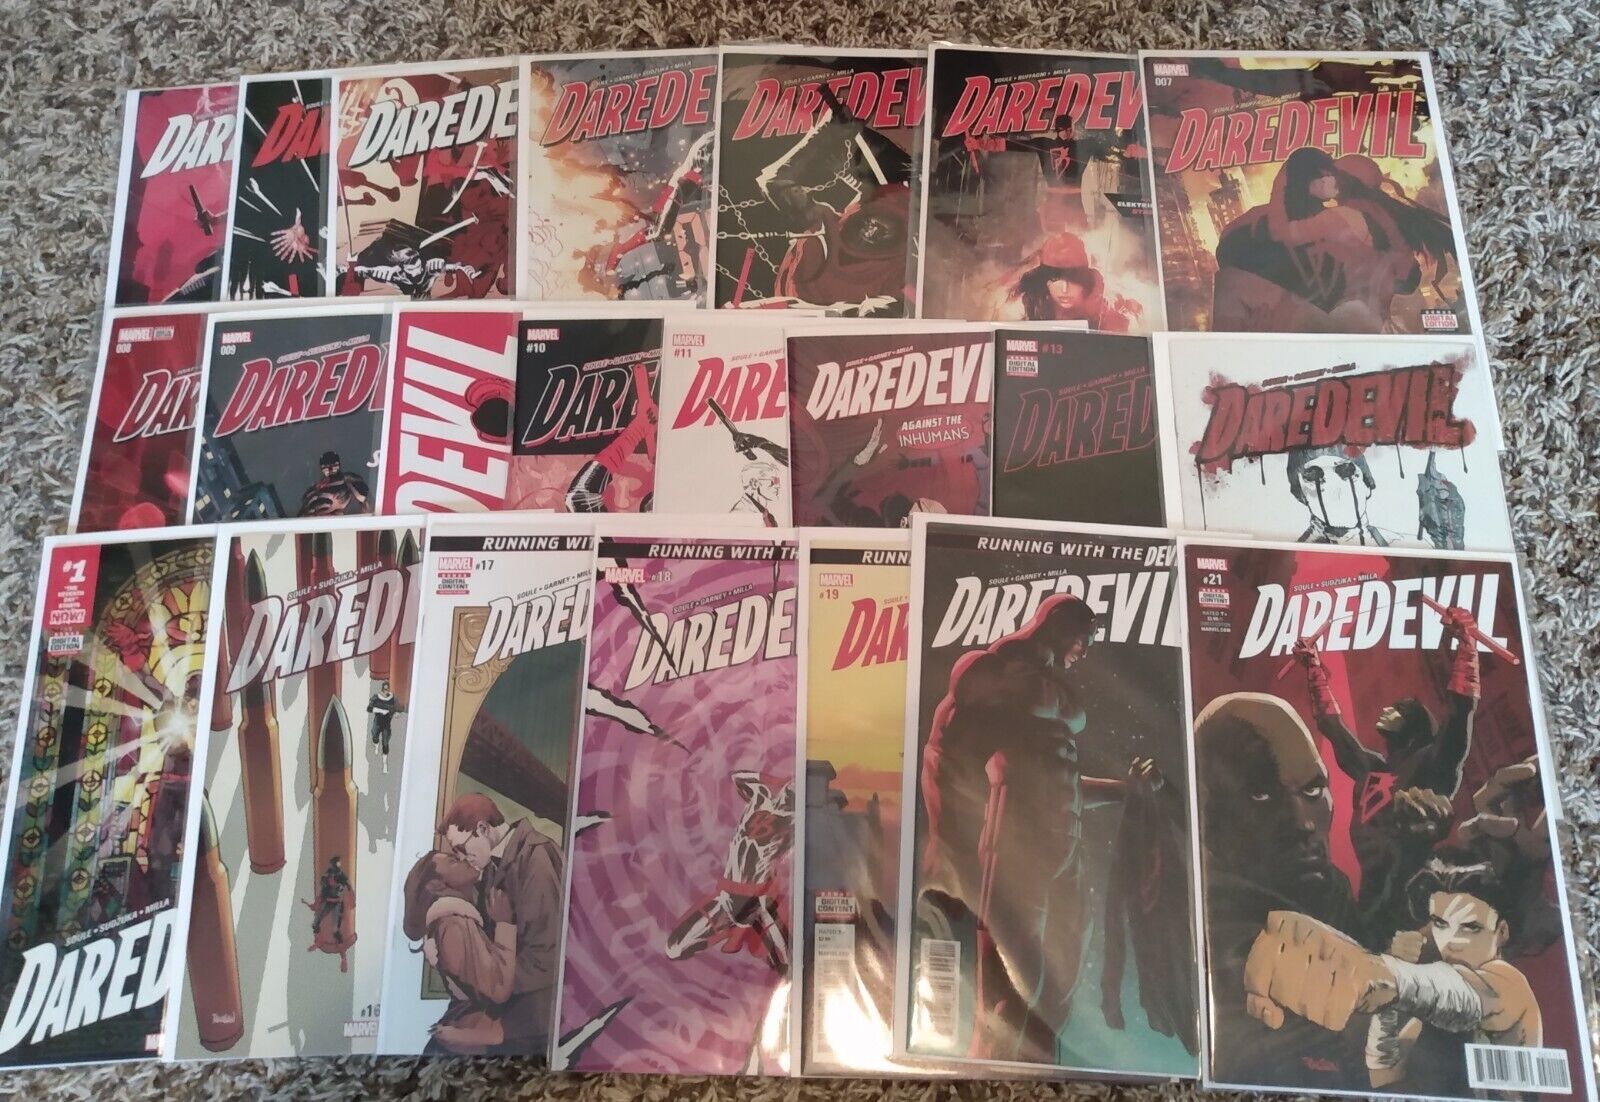 Daredevil (2015) #1-28, #595-612 Complete Run Charles Soule and Annuals #1-2